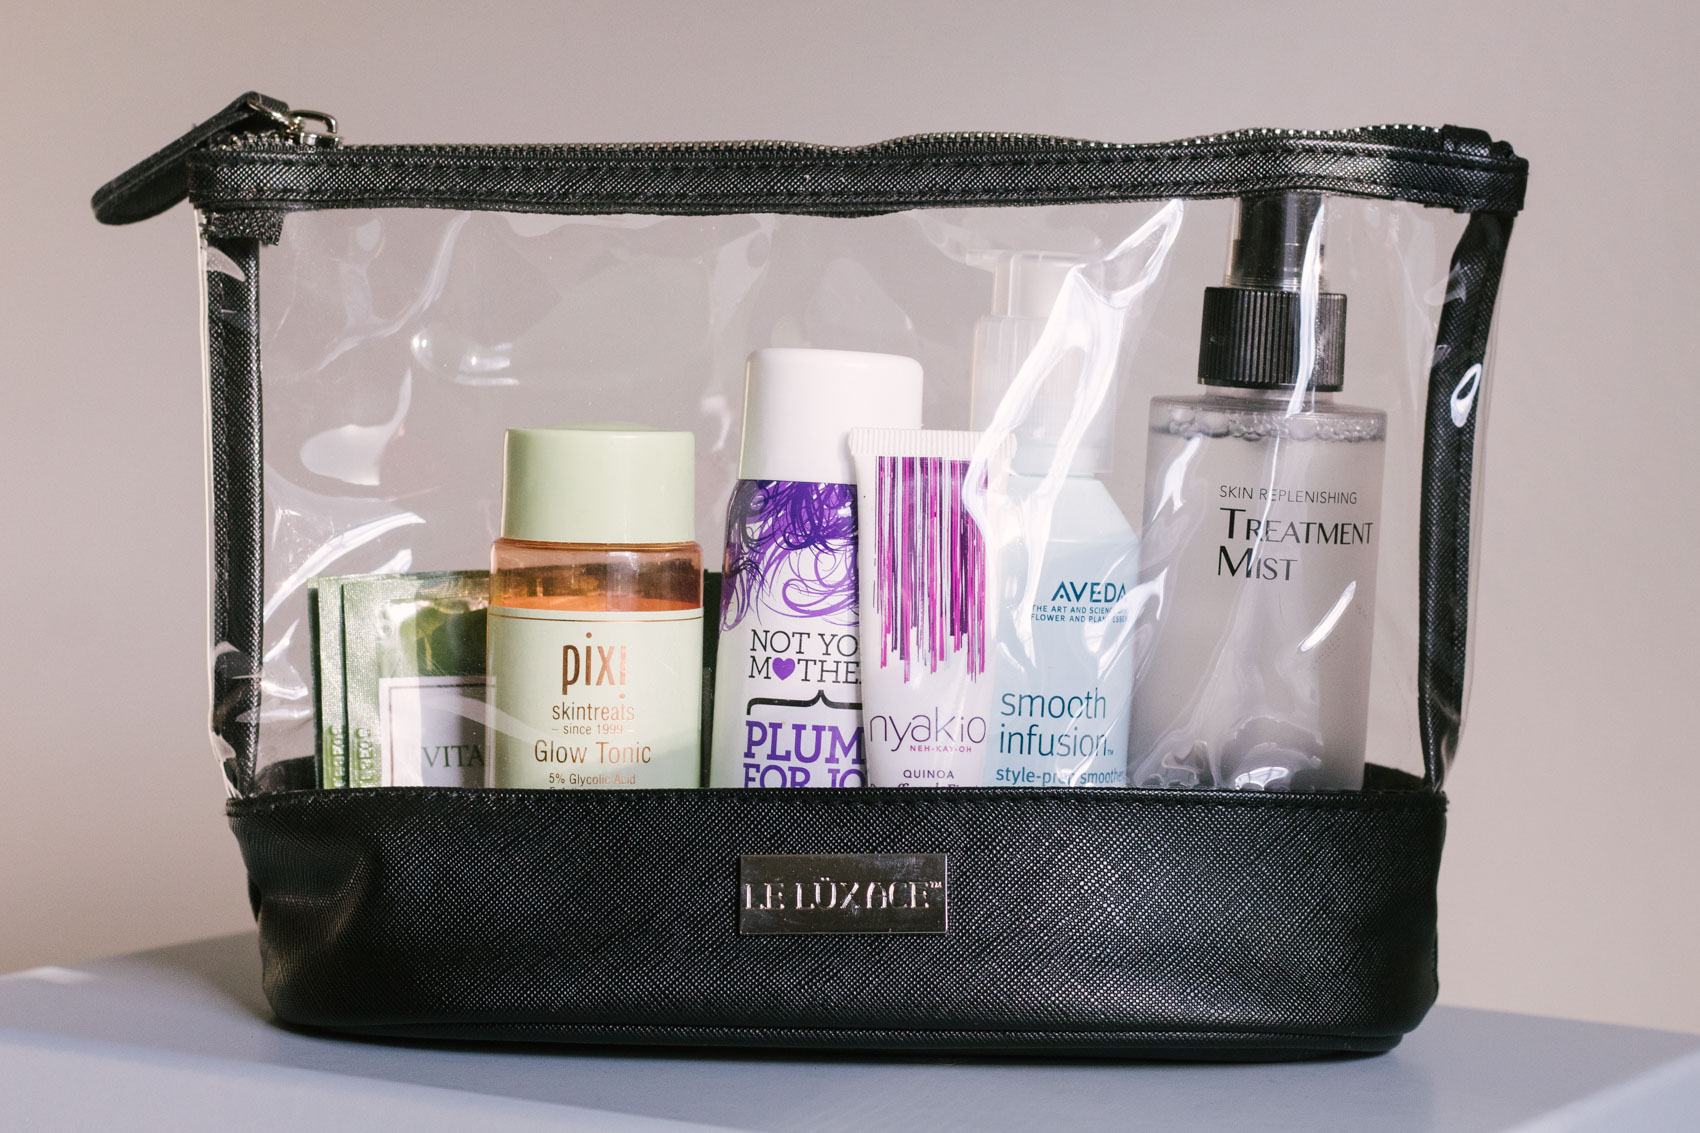 Next time you're packing for a trip, don't leave home without these 6 travel toiletries and travel beauty essentials to keep your skin fresh and protected!